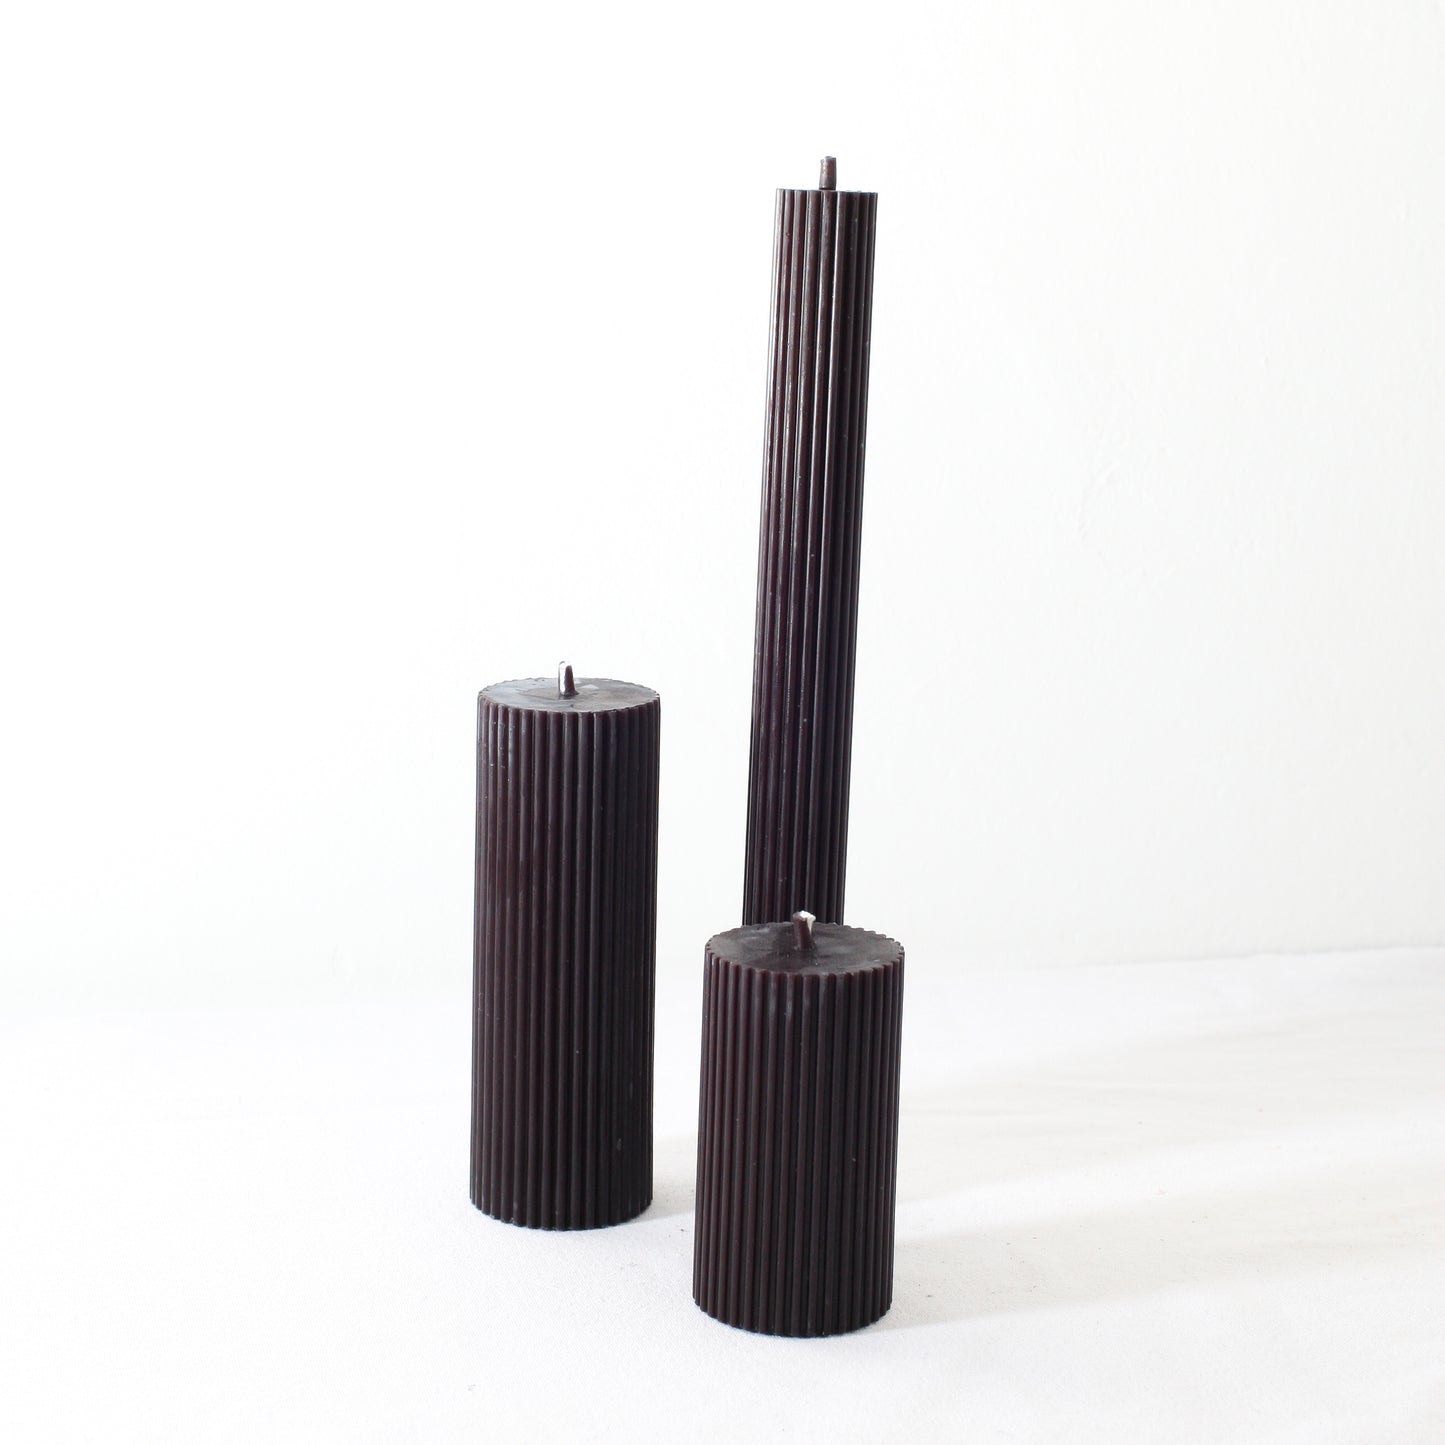 Set of 3 Cylinders Beeswax Candles